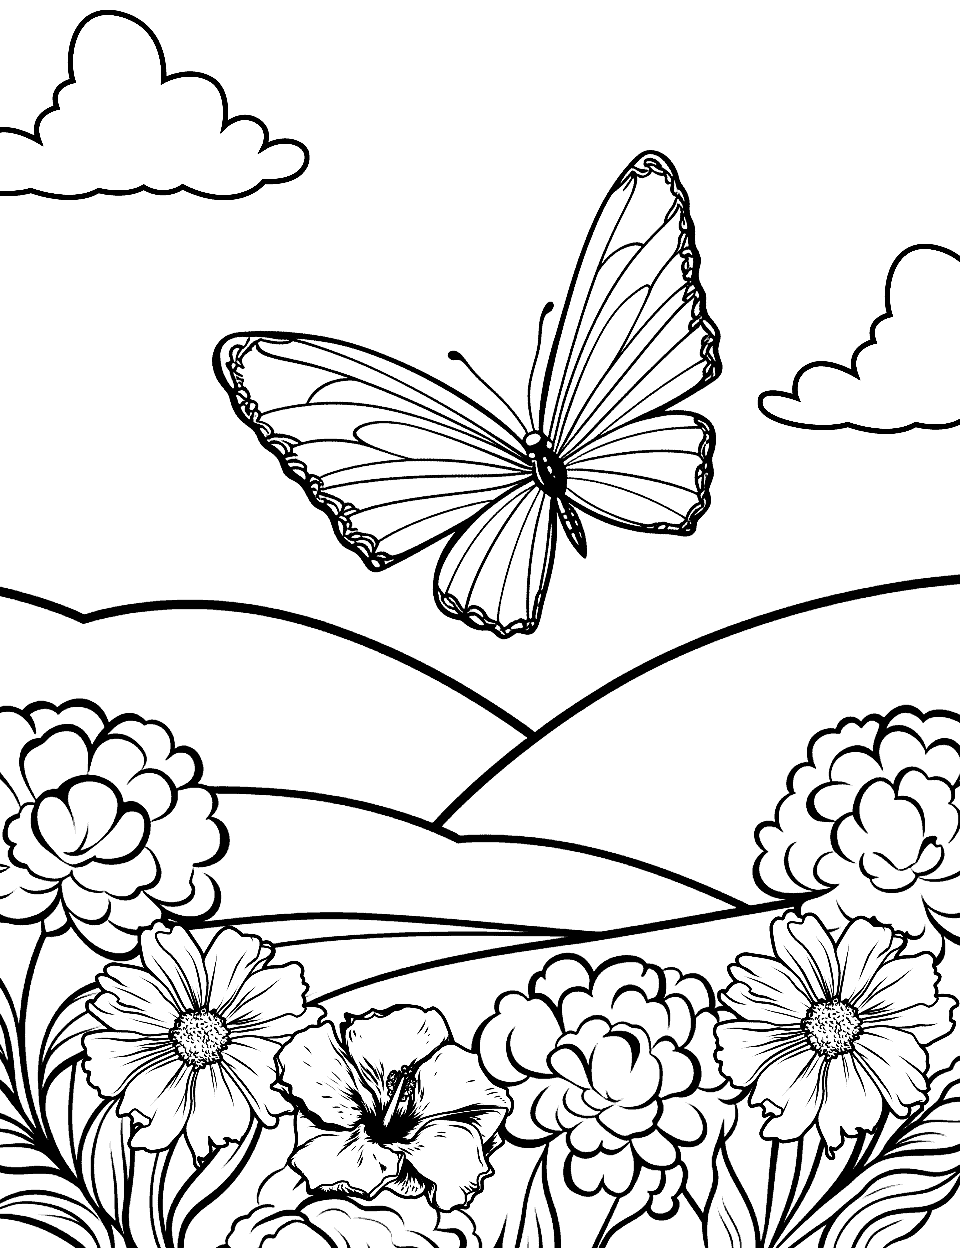 Butterfly Flying Coloring Page - A delicate butterfly flying over flowers in a lush garden.